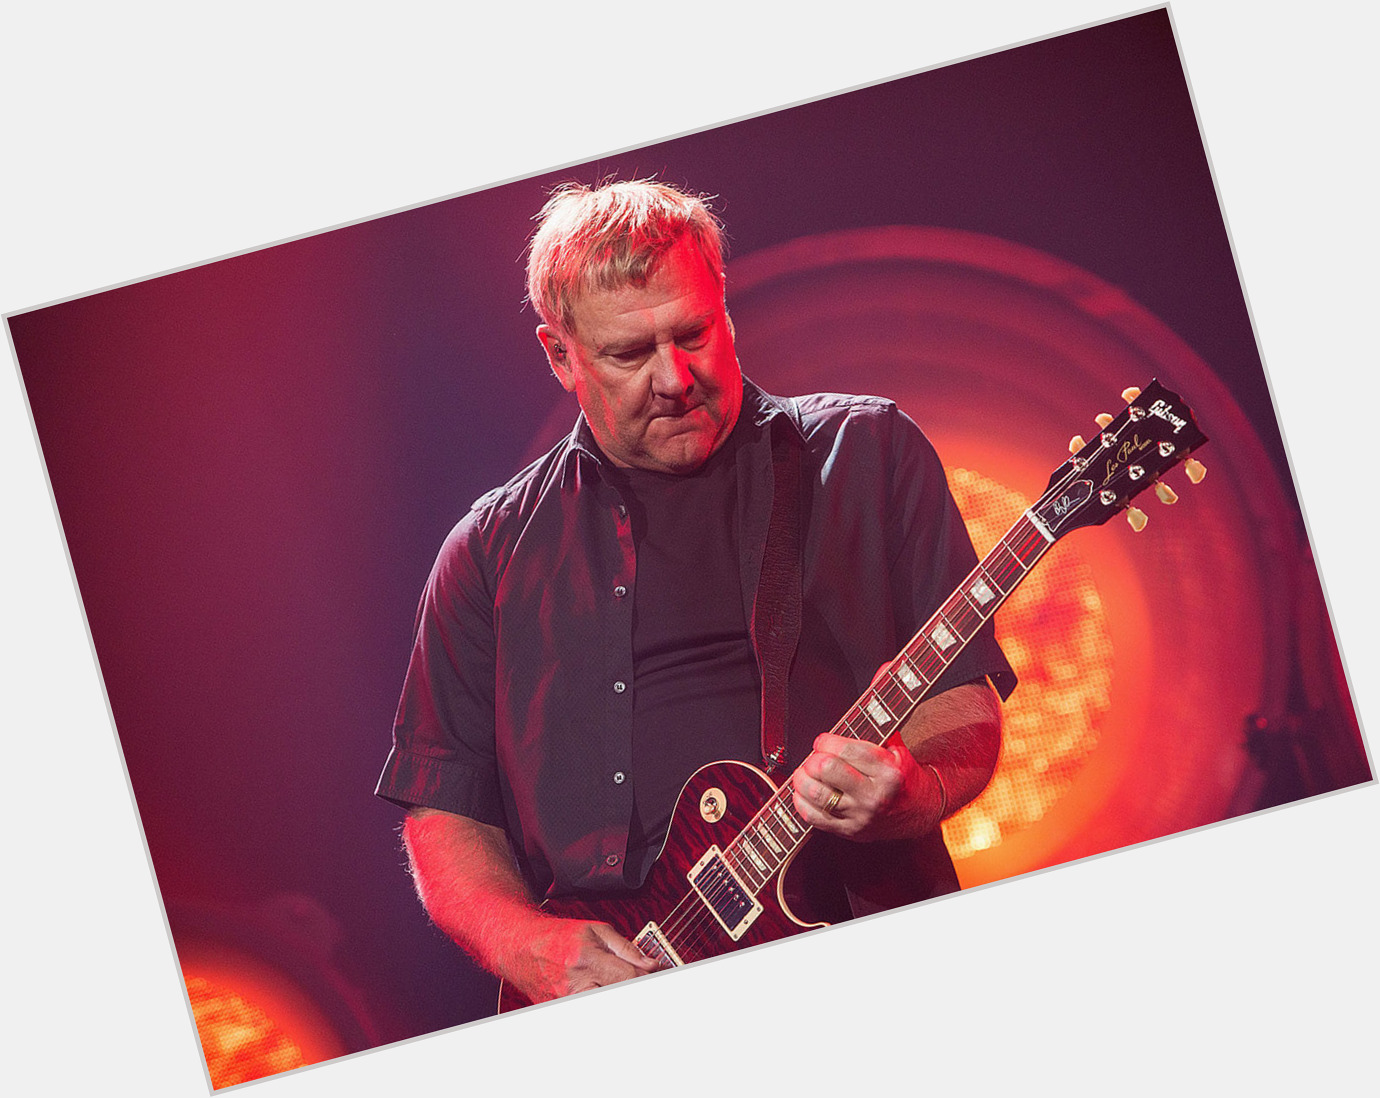 Happy Birthday on August the 27th to guitarist and songwriter Alex Lifeson, co-founder of Rush. 